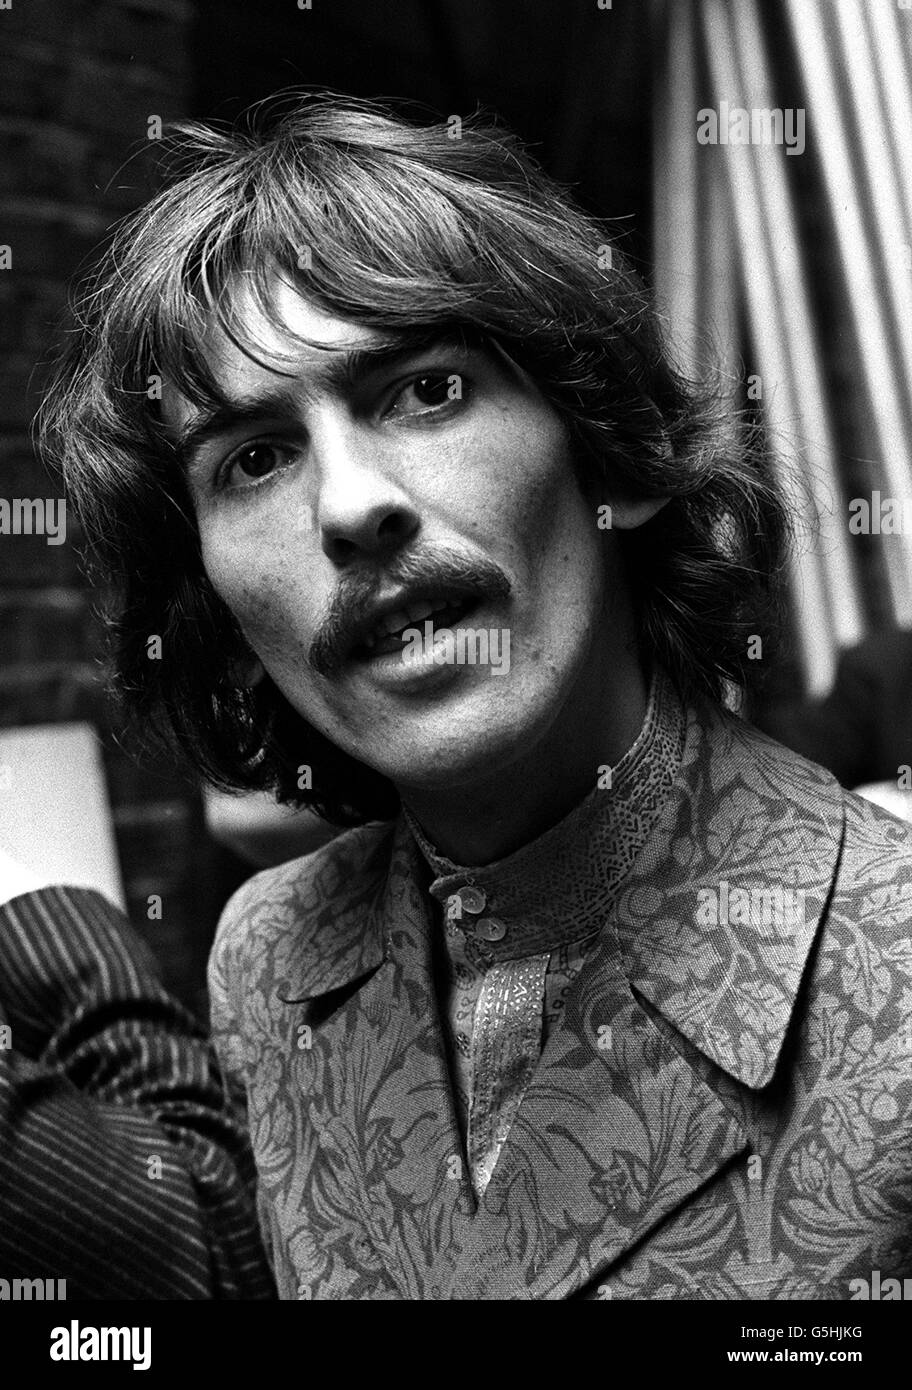 George Harrison, of the Beatles, at the EMI Studios, St. John's Wood, London. He has been rehearsing at the EMI Studios in St. John's Wood, London, for the group's appearance in the international television programme 'Our World'. They have written a song 'All You Need is Love' especially for the programme. Stock Photo